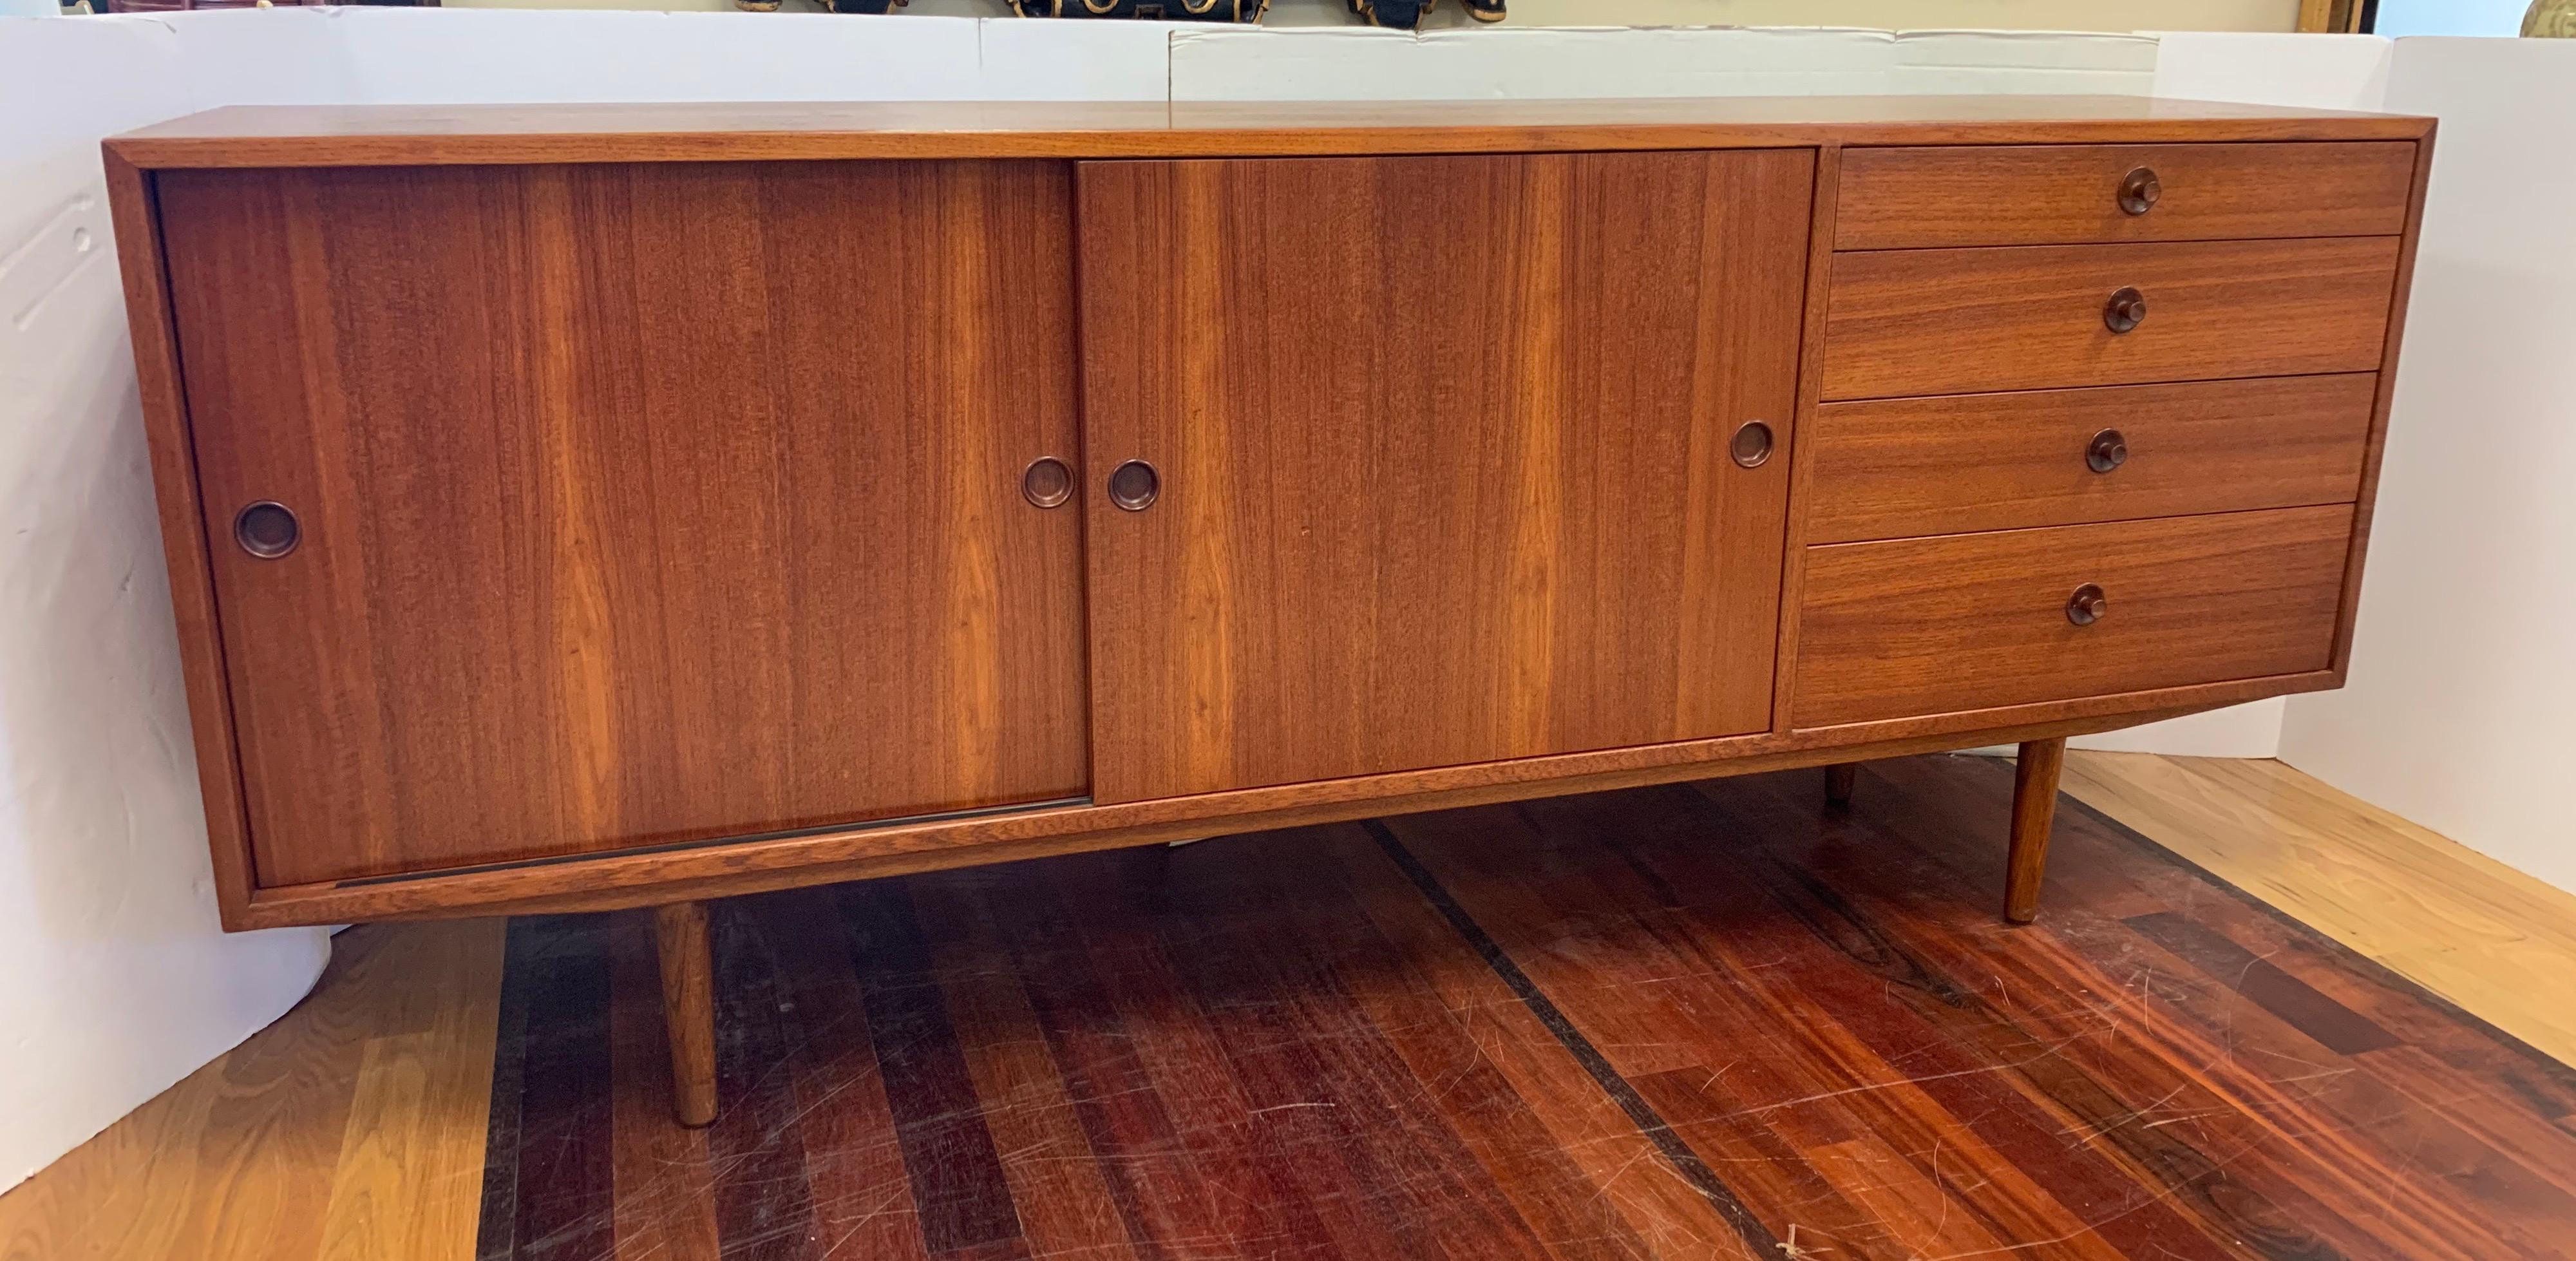 Signed Danish modern Hans Wegner teak sideboard. With all hallmarks on back circa 1950s. Features clean lines, great scale and an iconic design. Versatile piece can be used as a sideboard, buffet or entertainment console. See all pictures attached